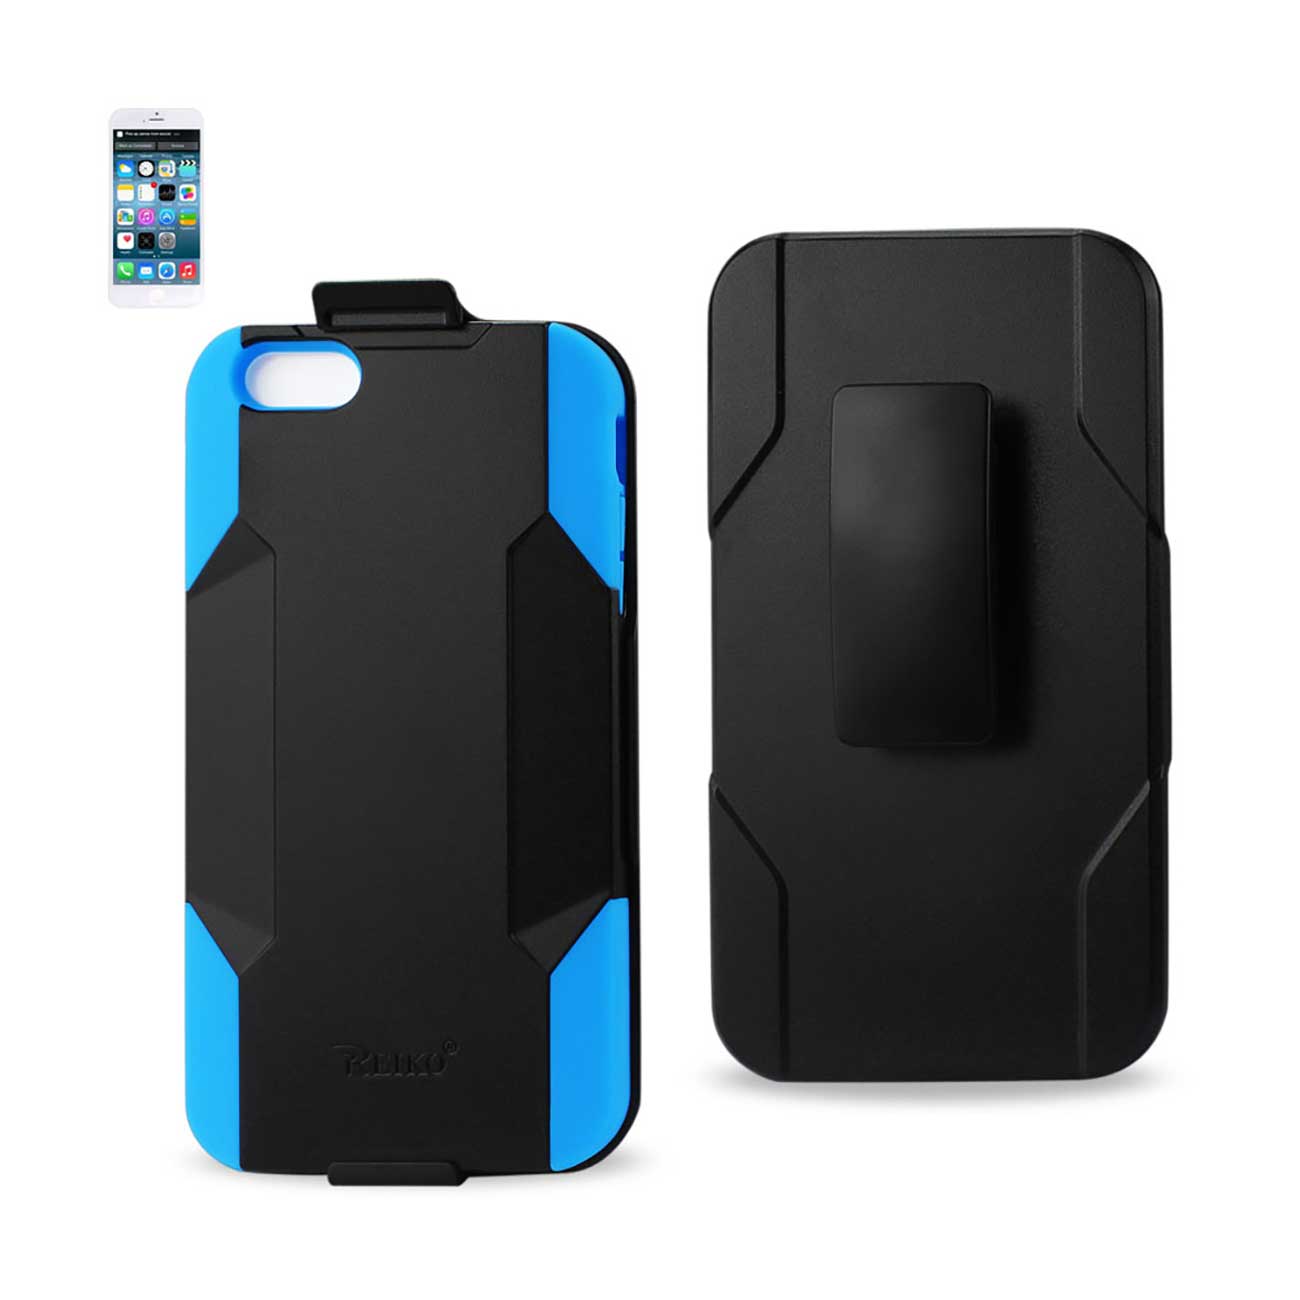 Case Holster Combo Hybrid Heavy Duty 3-In-1 iPhone 6 Plus Navy Black Color